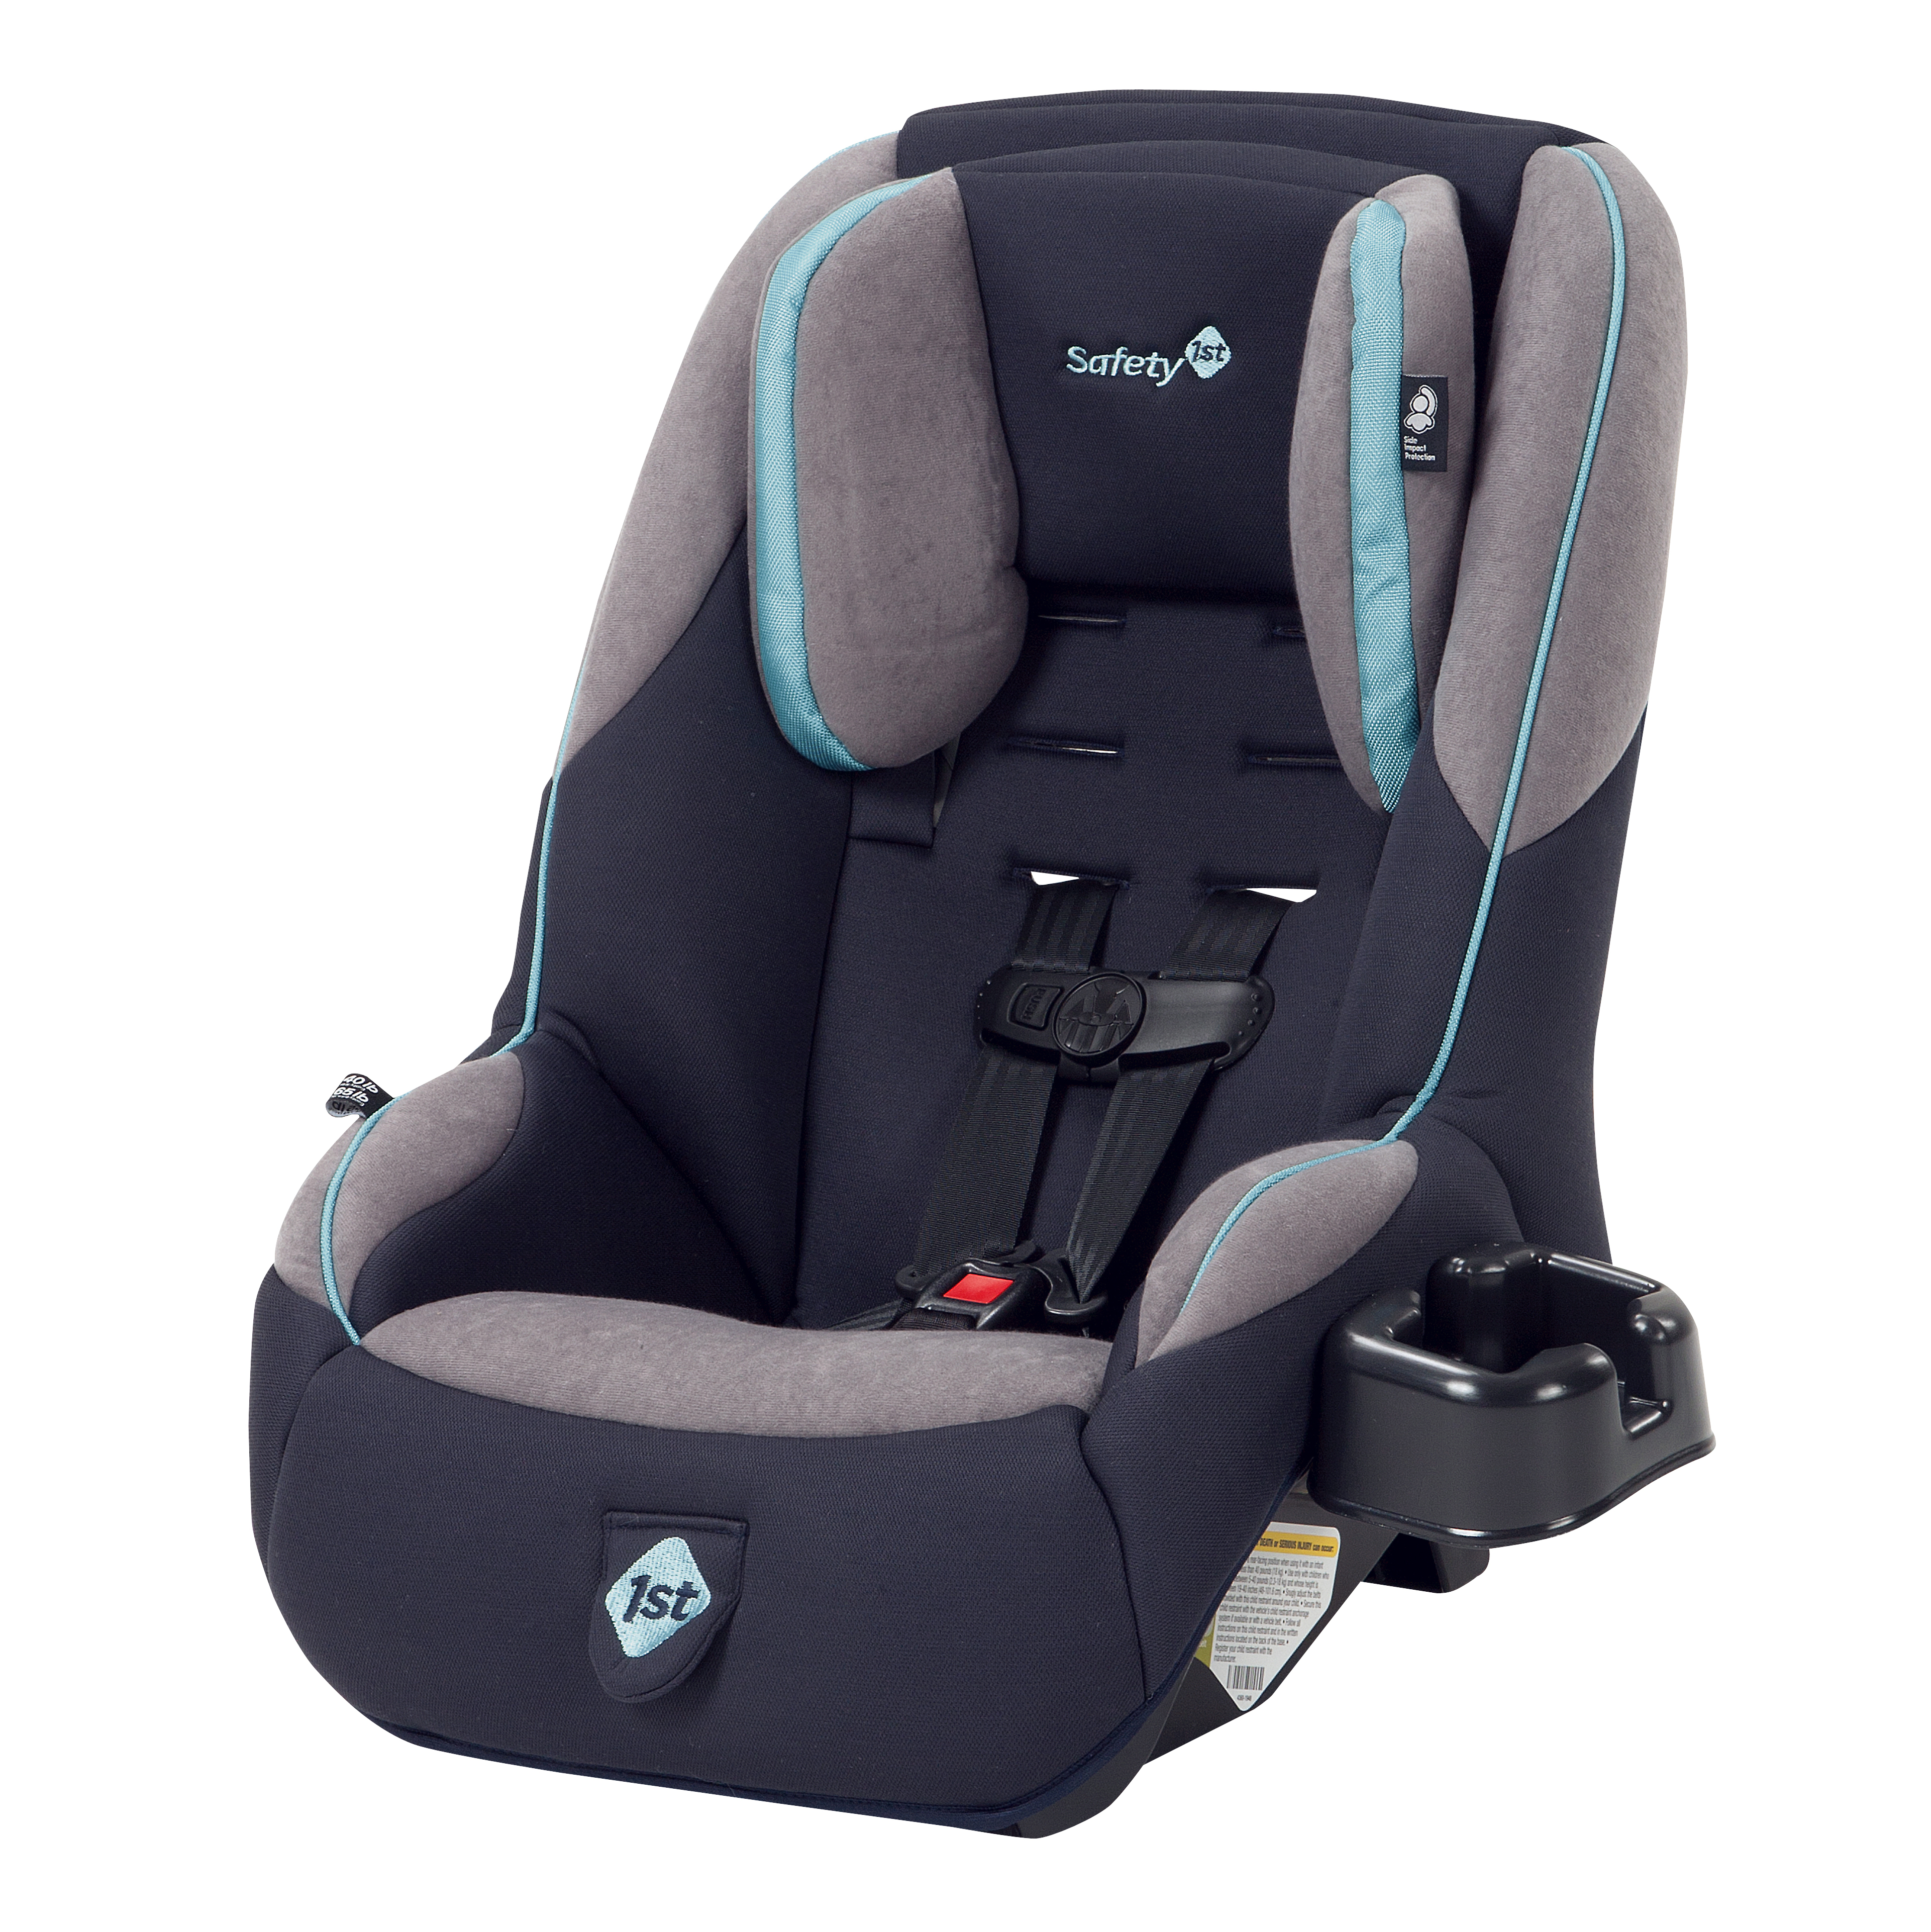 Safety 1st Guide 65 Sport Convertible Car Seat - image 1 of 14